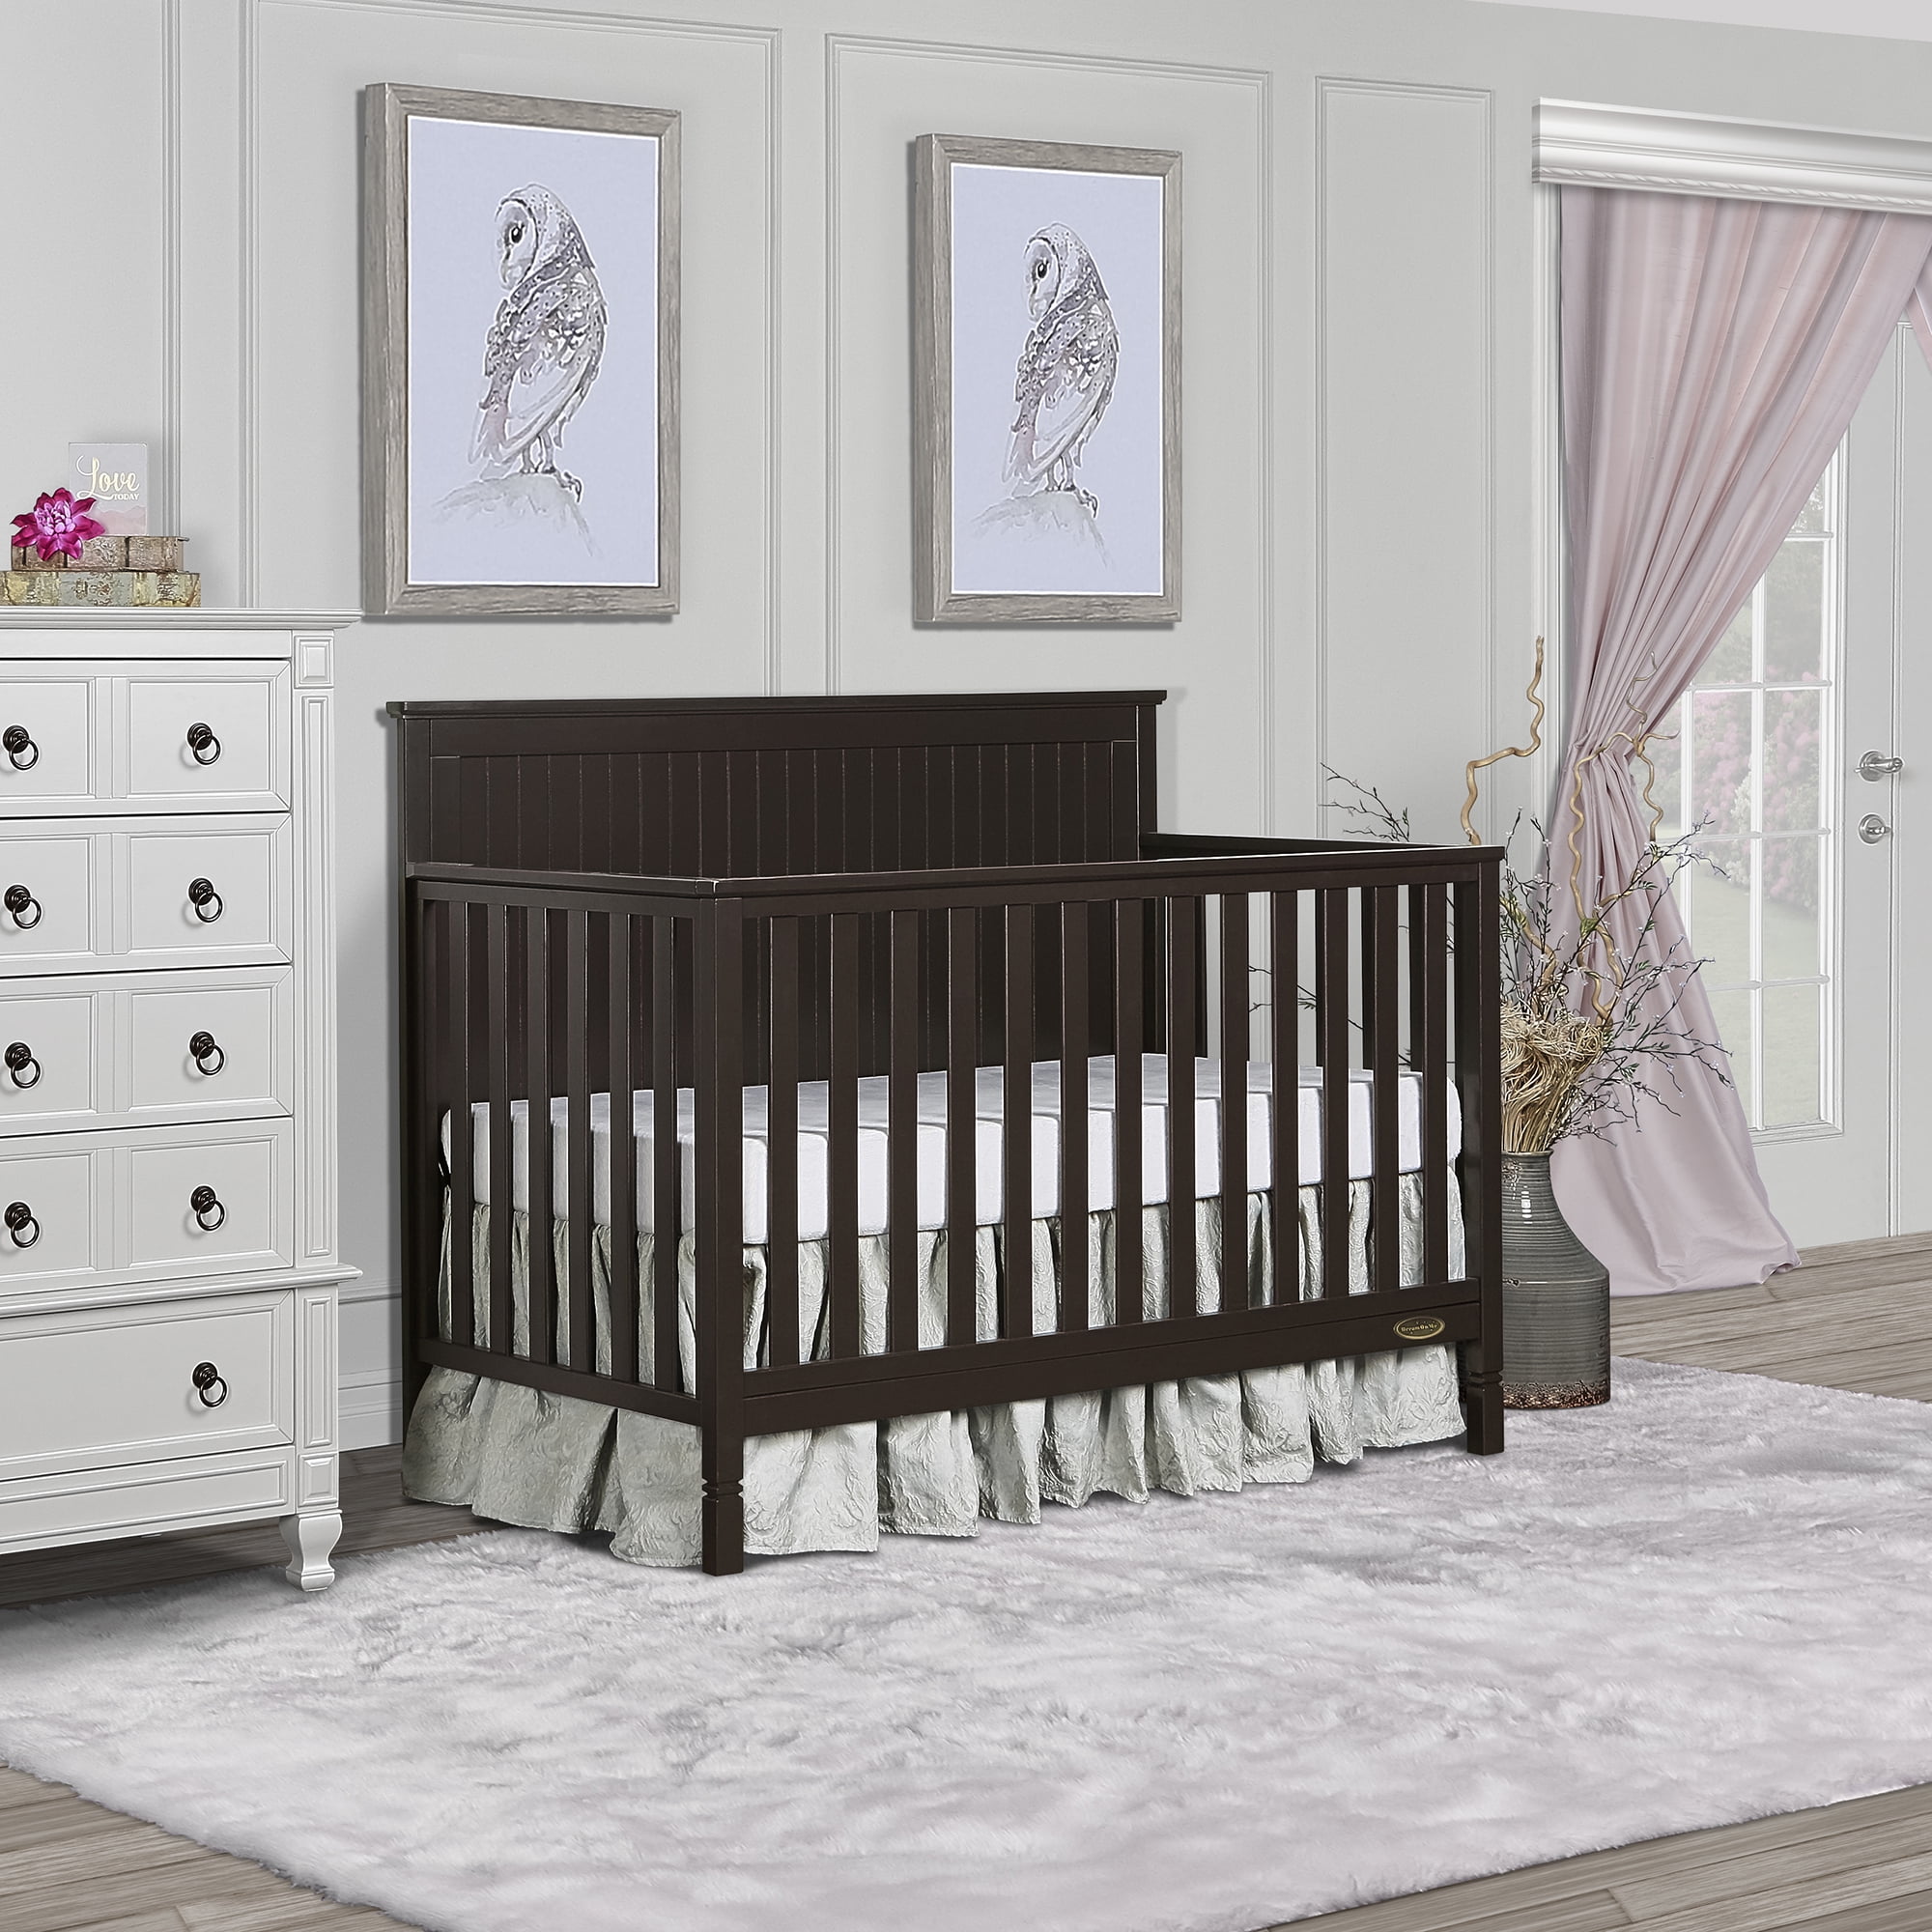 Twilight Navy with Dream On Me Spring Crib and Toddler Bed Mattress Dream On Me Alexa 5 in 1 Convertible crib 